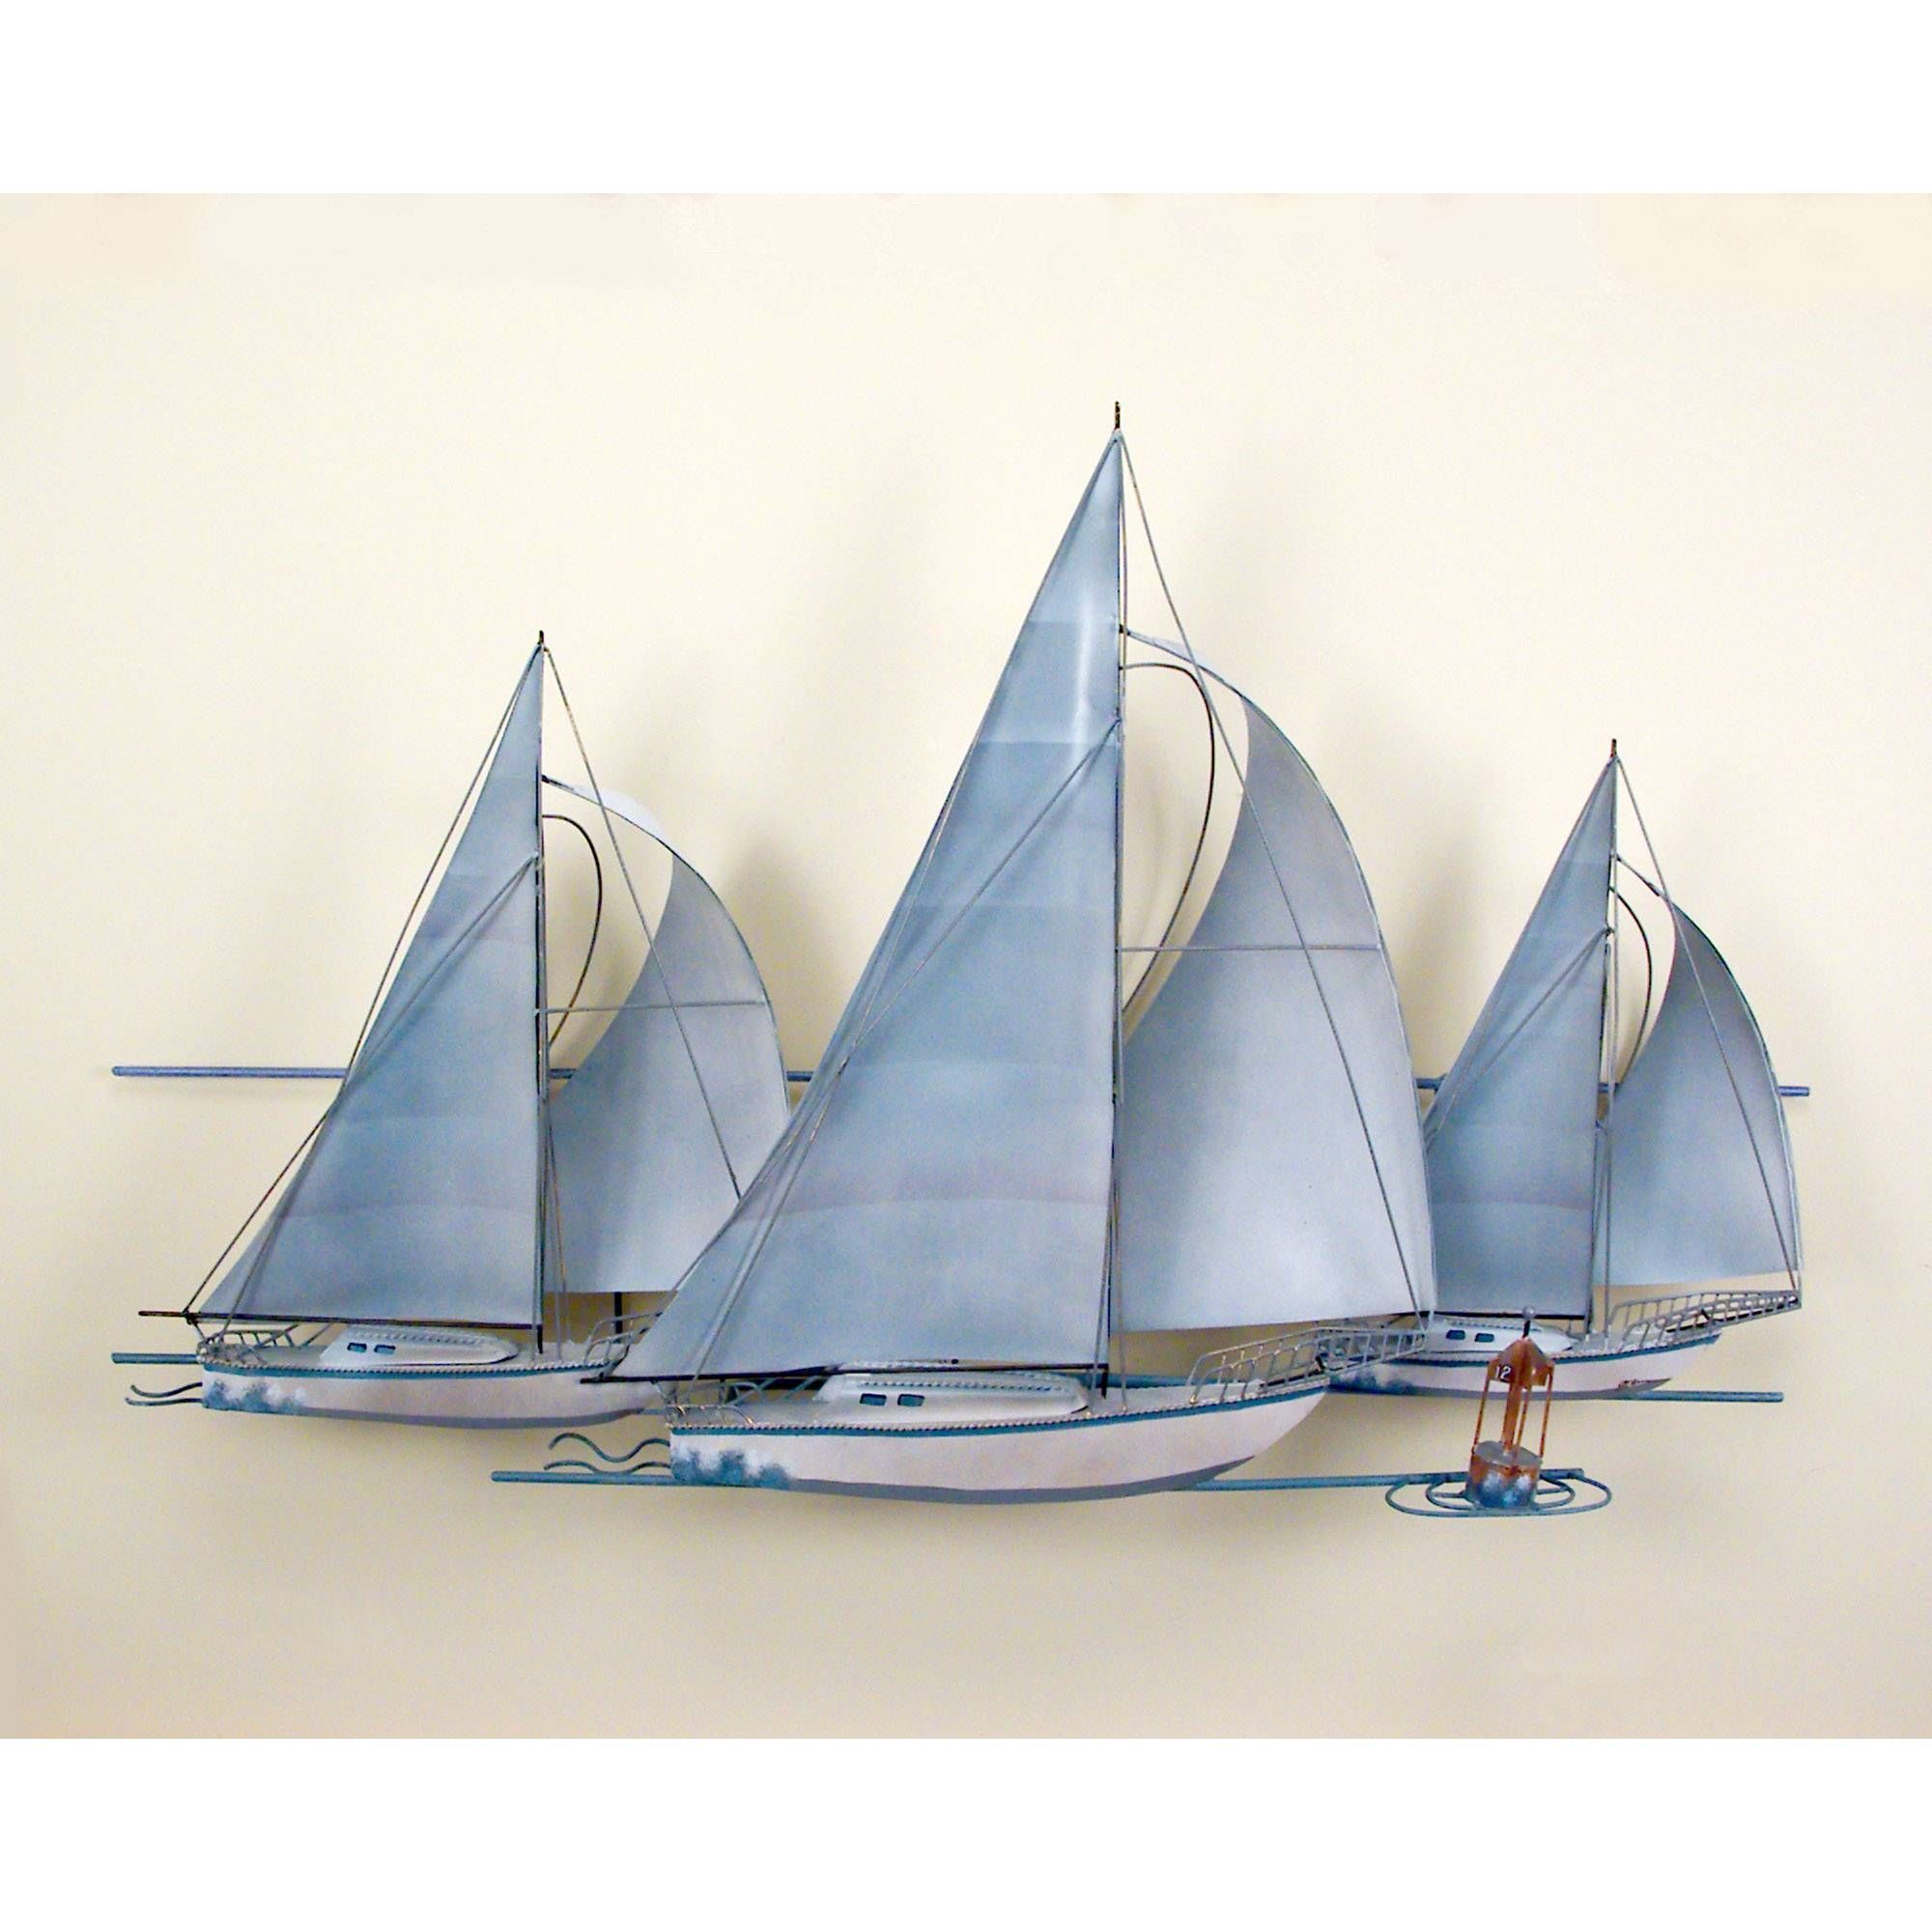 At The Races,three Sail Boats, Race, Wall Art, Wall Hanging Regarding Current Boat Wall Art (View 1 of 20)